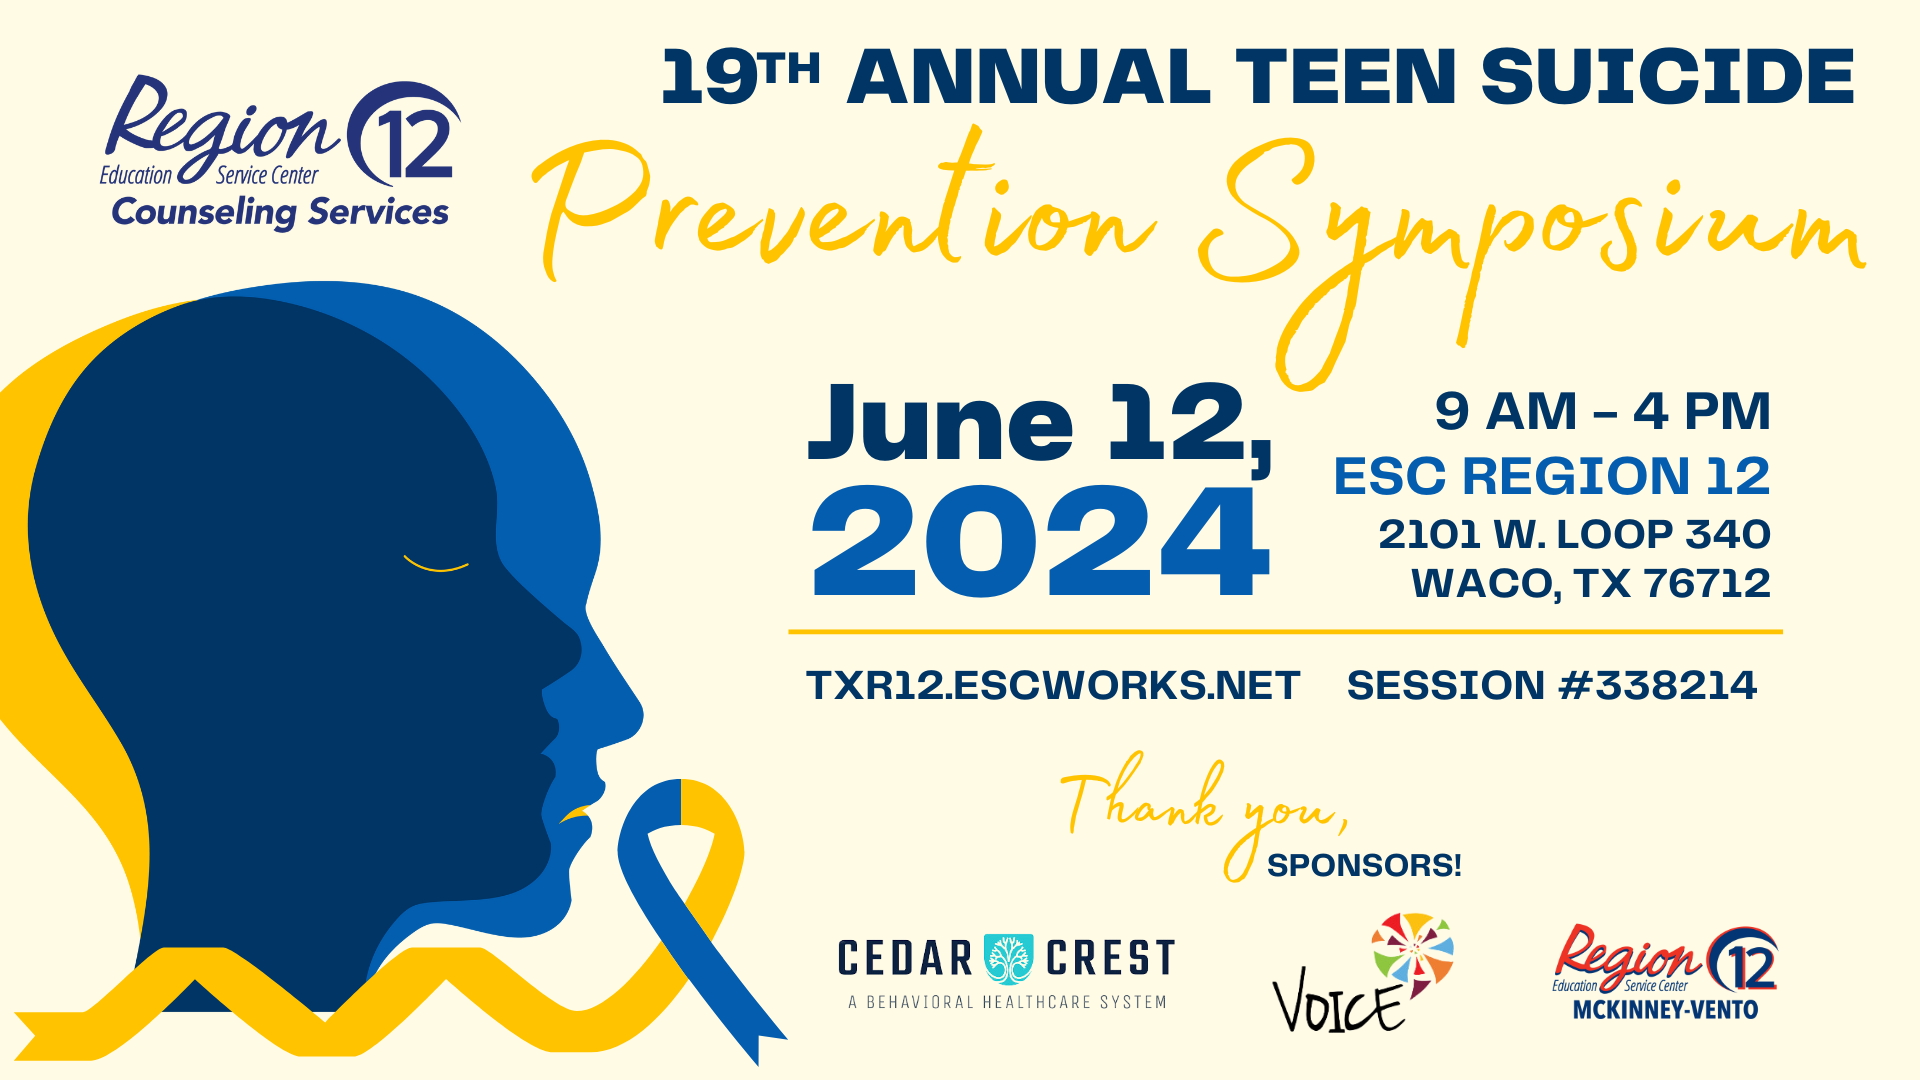 19th Annual Teen Suicide Prevention Symposium Graphic